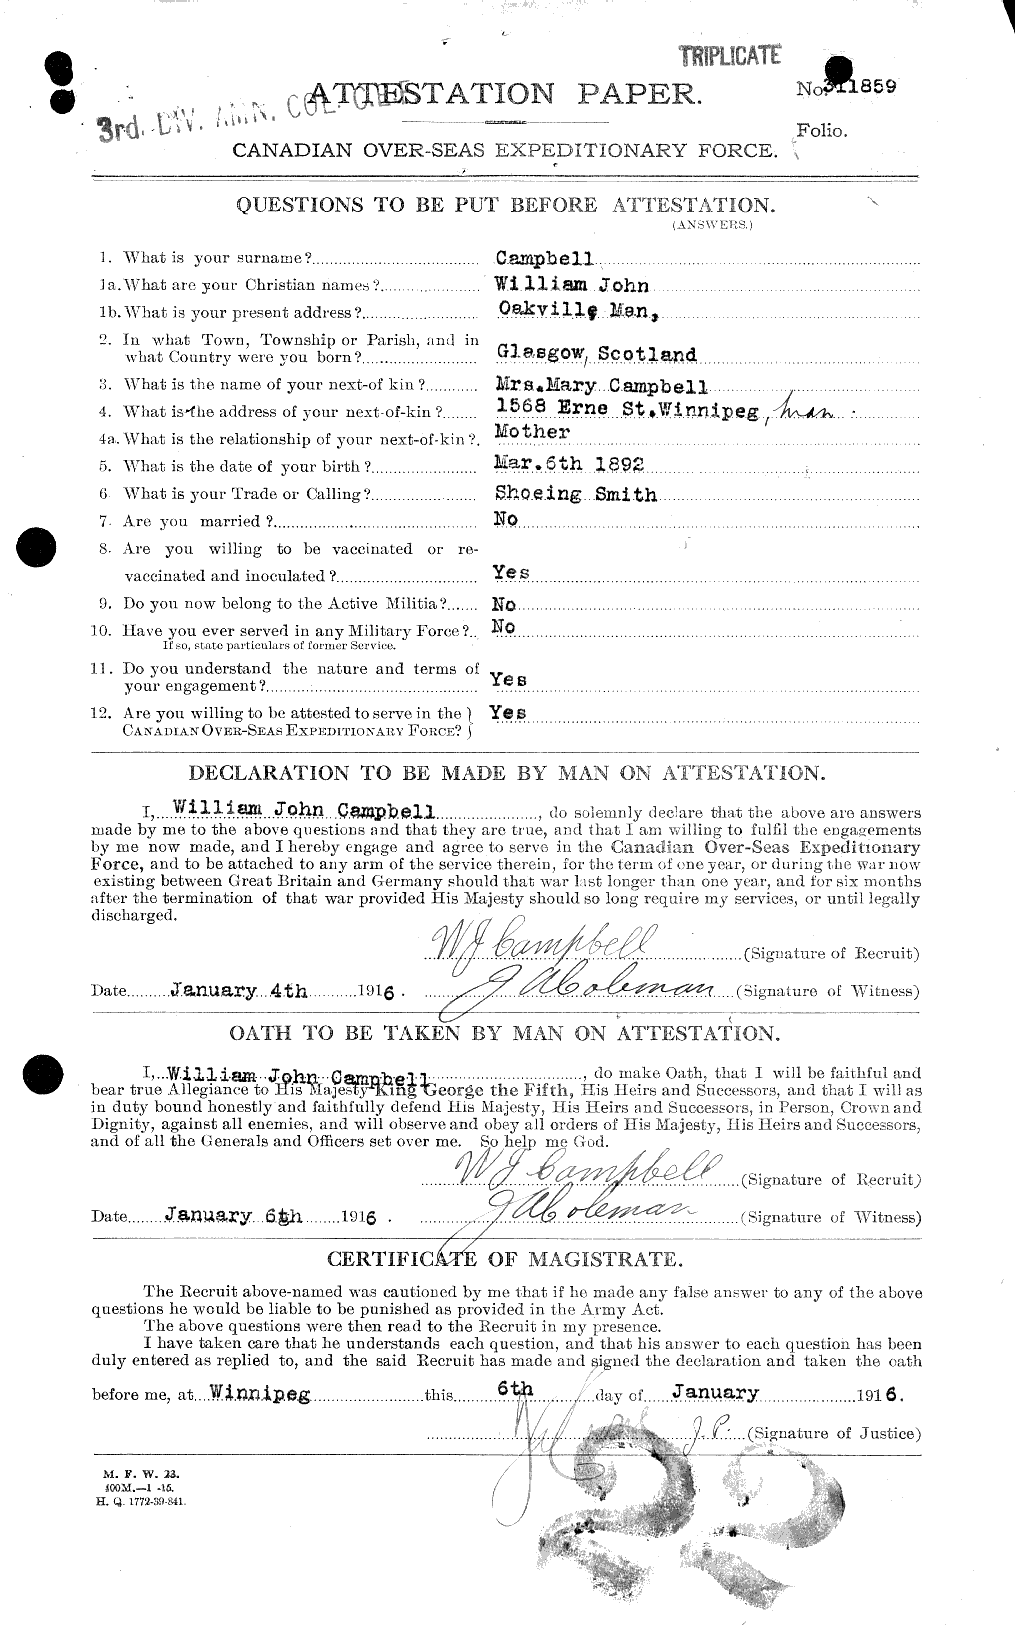 Personnel Records of the First World War - CEF 008699a